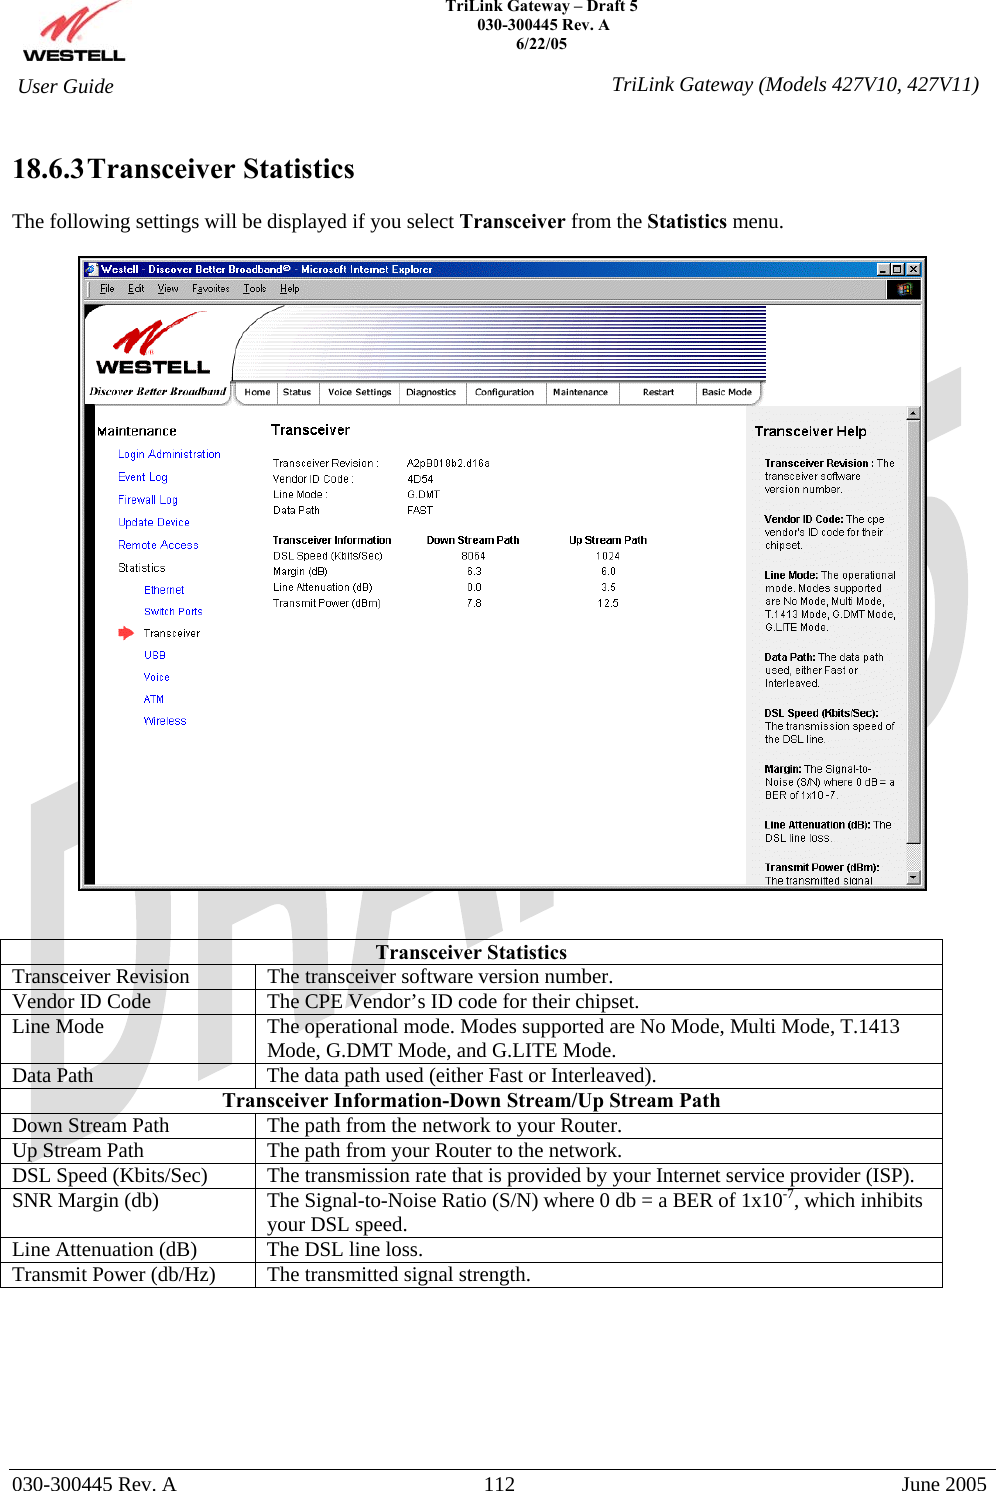    TriLink Gateway – Draft 5   030-300445 Rev. A 6/22/05   030-300445 Rev. A  112  June 2005  User Guide  TriLink Gateway (Models 427V10, 427V11) 18.6.3 Transceiver  Statistics  The following settings will be displayed if you select Transceiver from the Statistics menu.     Transceiver Statistics Transceiver Revision  The transceiver software version number. Vendor ID Code  The CPE Vendor’s ID code for their chipset. Line Mode  The operational mode. Modes supported are No Mode, Multi Mode, T.1413 Mode, G.DMT Mode, and G.LITE Mode. Data Path  The data path used (either Fast or Interleaved). Transceiver Information-Down Stream/Up Stream Path Down Stream Path  The path from the network to your Router. Up Stream Path  The path from your Router to the network. DSL Speed (Kbits/Sec)  The transmission rate that is provided by your Internet service provider (ISP). SNR Margin (db)  The Signal-to-Noise Ratio (S/N) where 0 db = a BER of 1x10-7, which inhibits your DSL speed. Line Attenuation (dB)  The DSL line loss. Transmit Power (db/Hz)  The transmitted signal strength.        